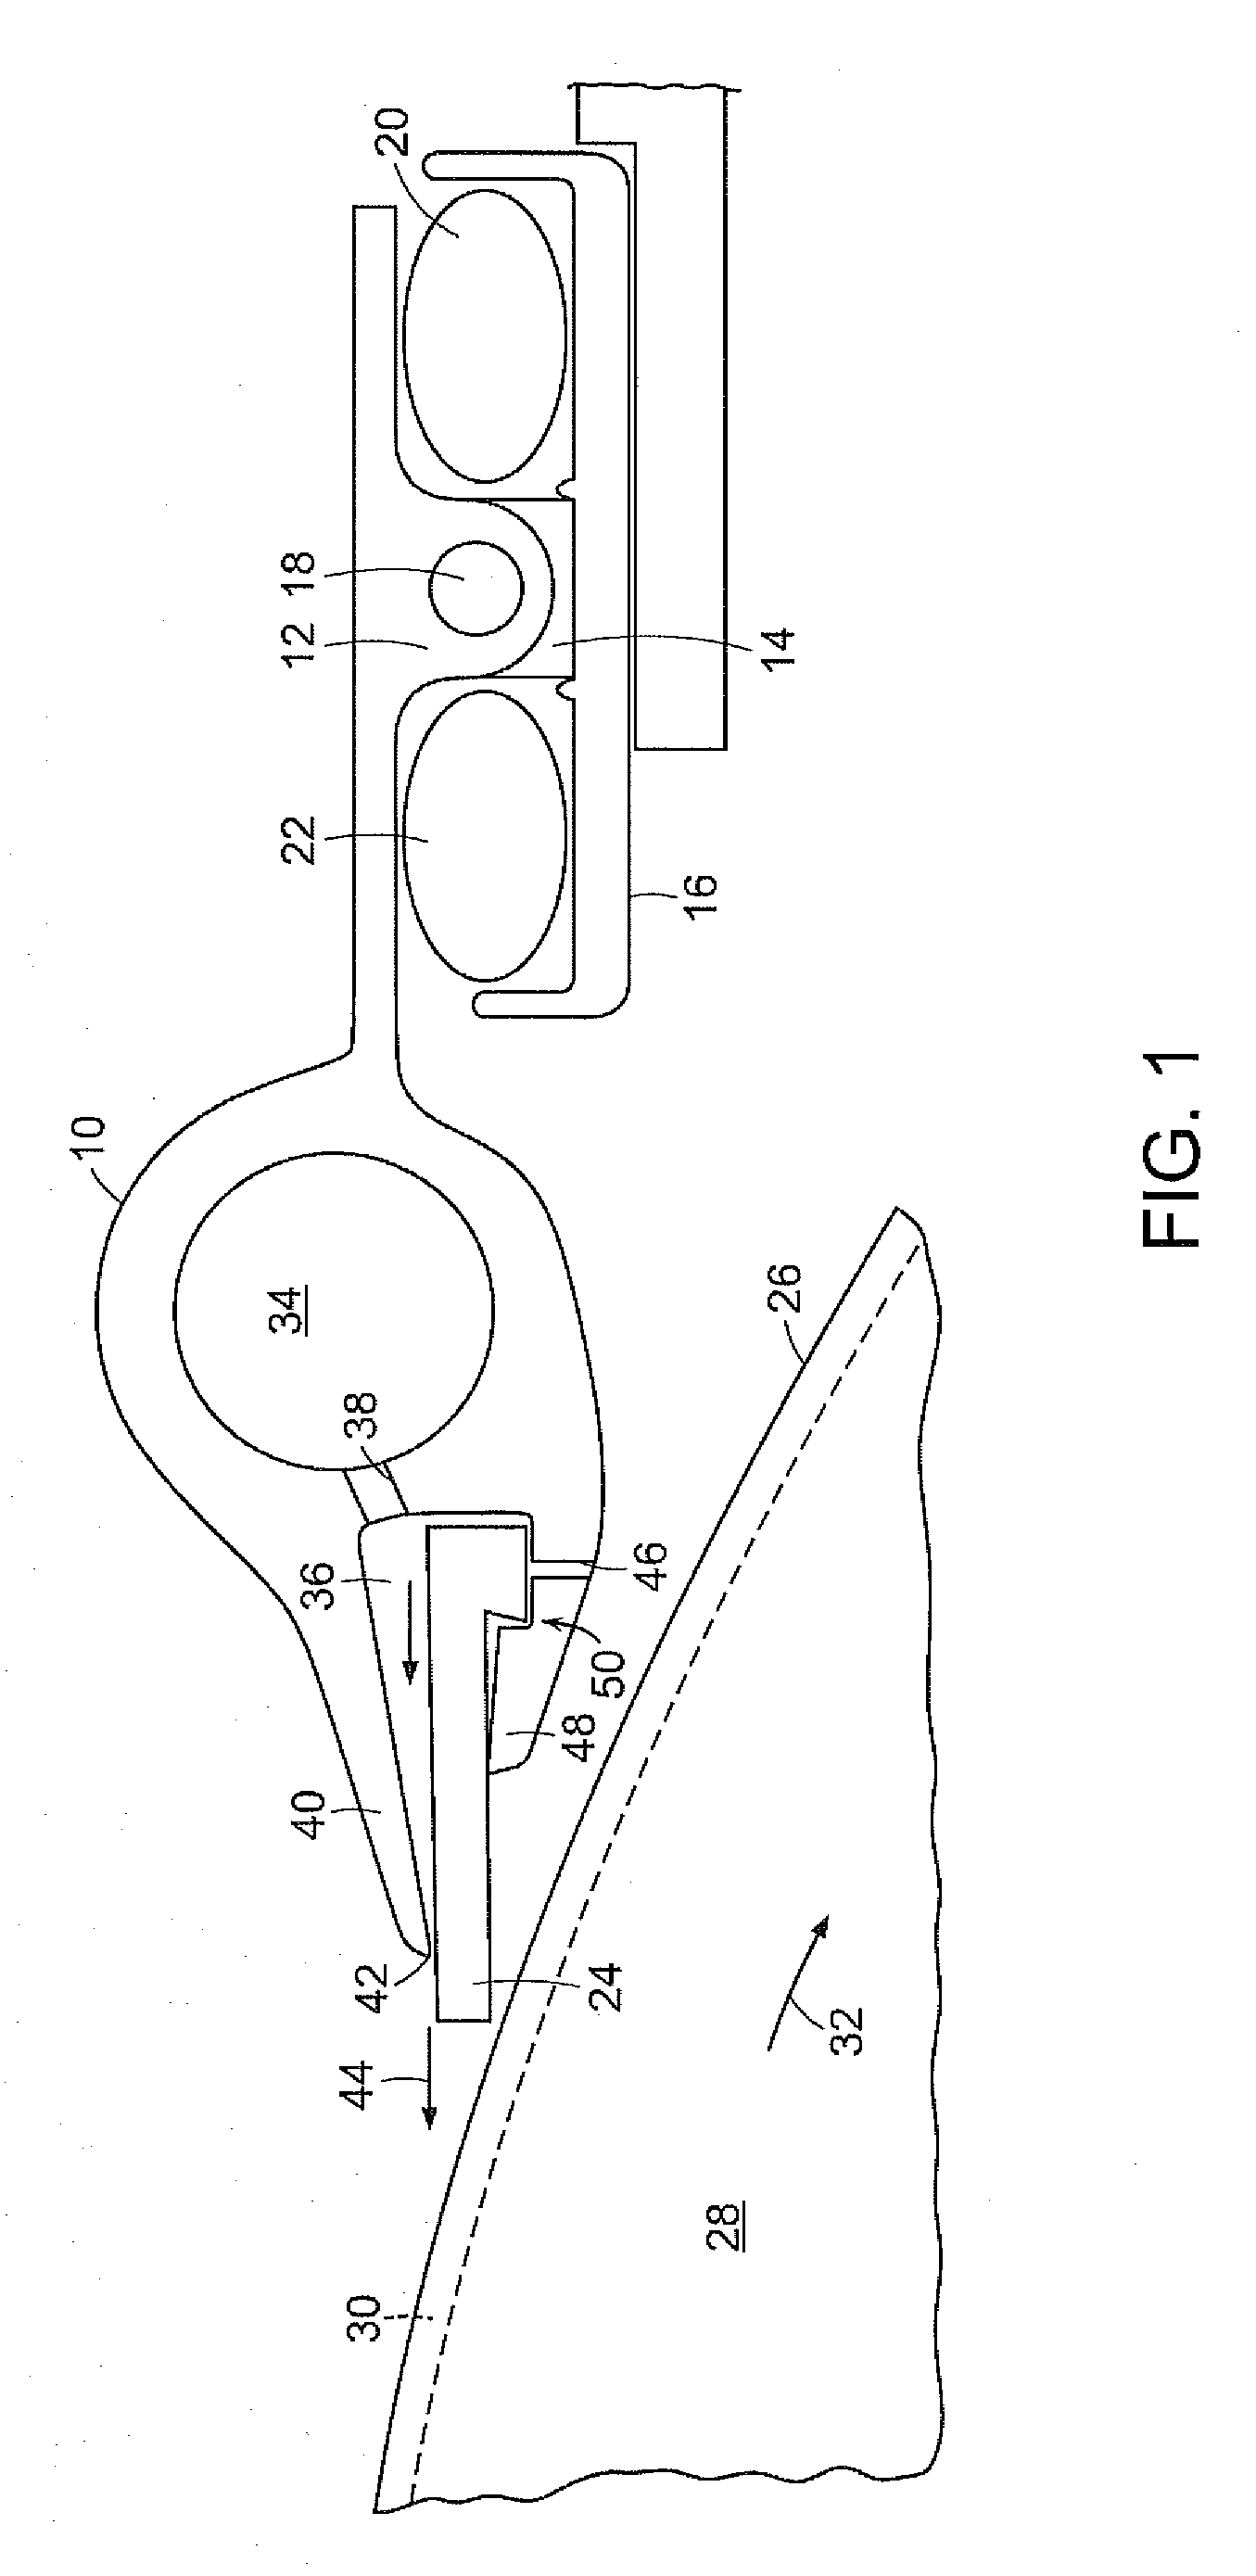 Systems and methods for providing improved dewatering performance in a papermaking machine